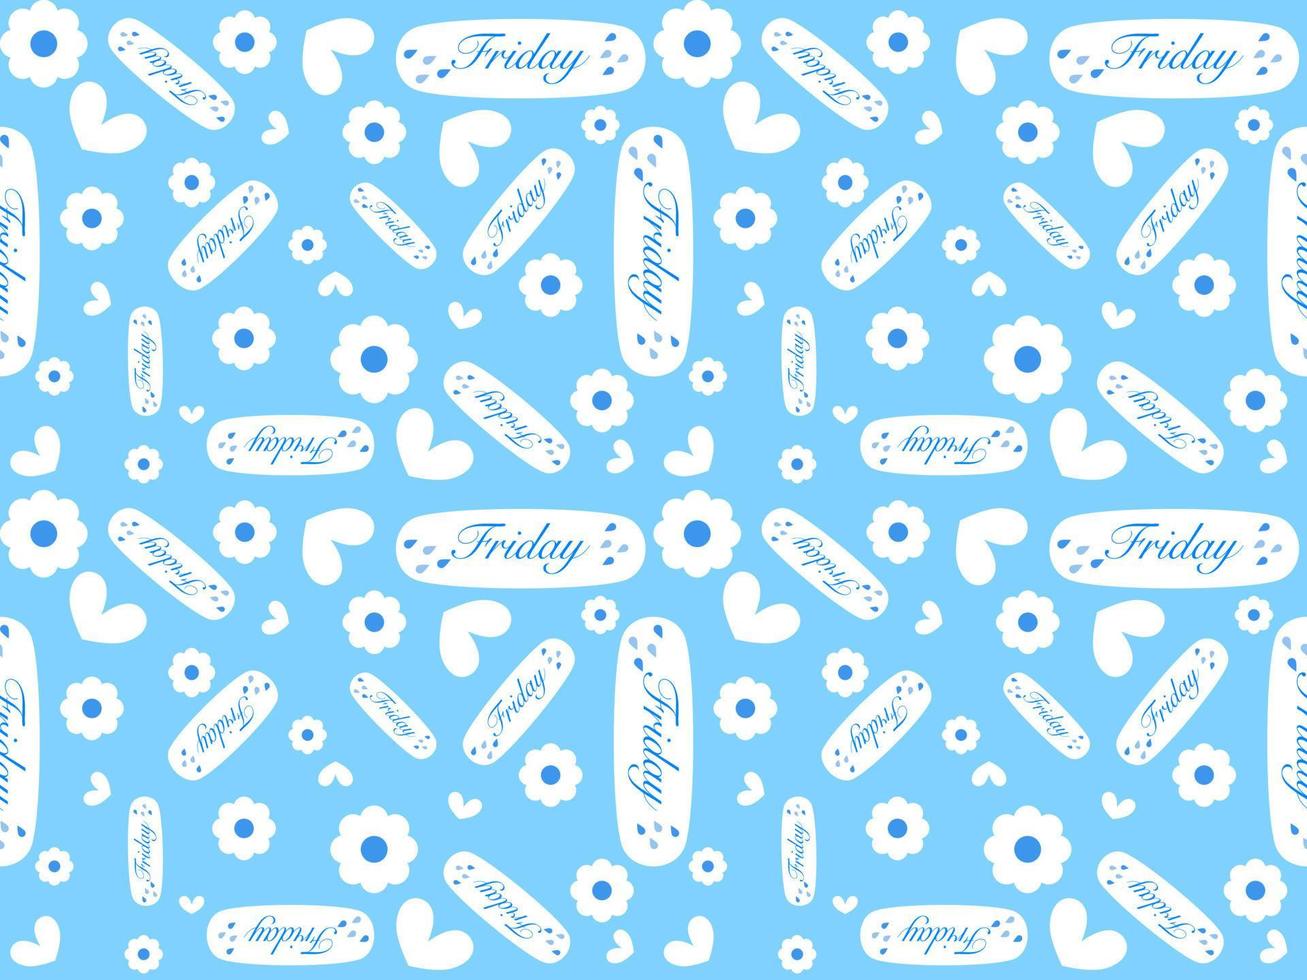 flower cartoon character seamless pattern on blue background vector